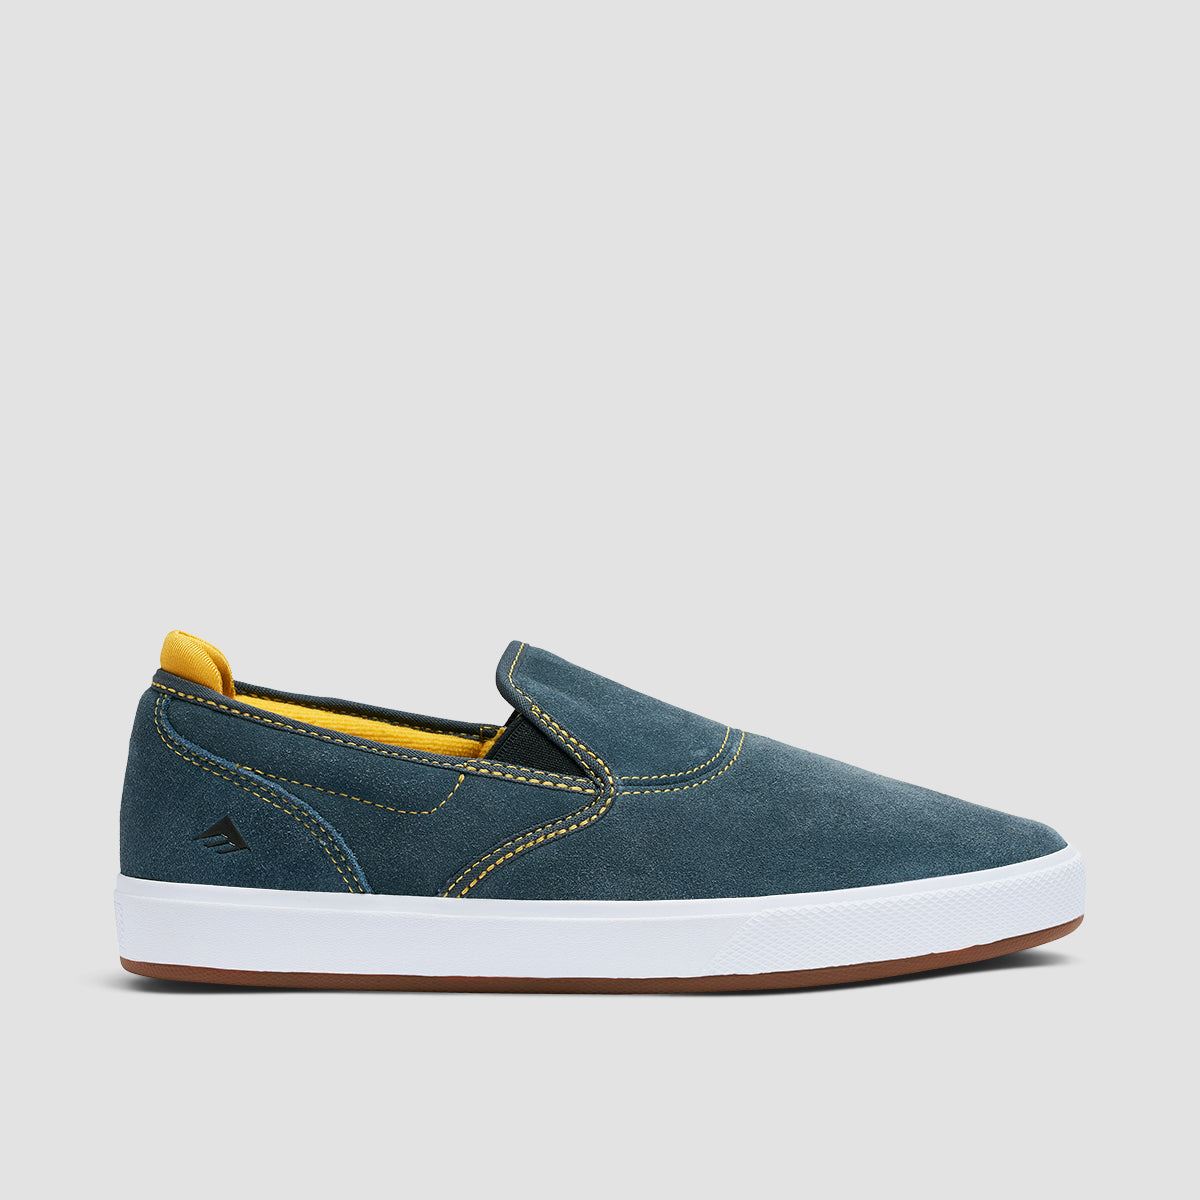 Emerica Wino G6 Cup Slip On Shoes Grey